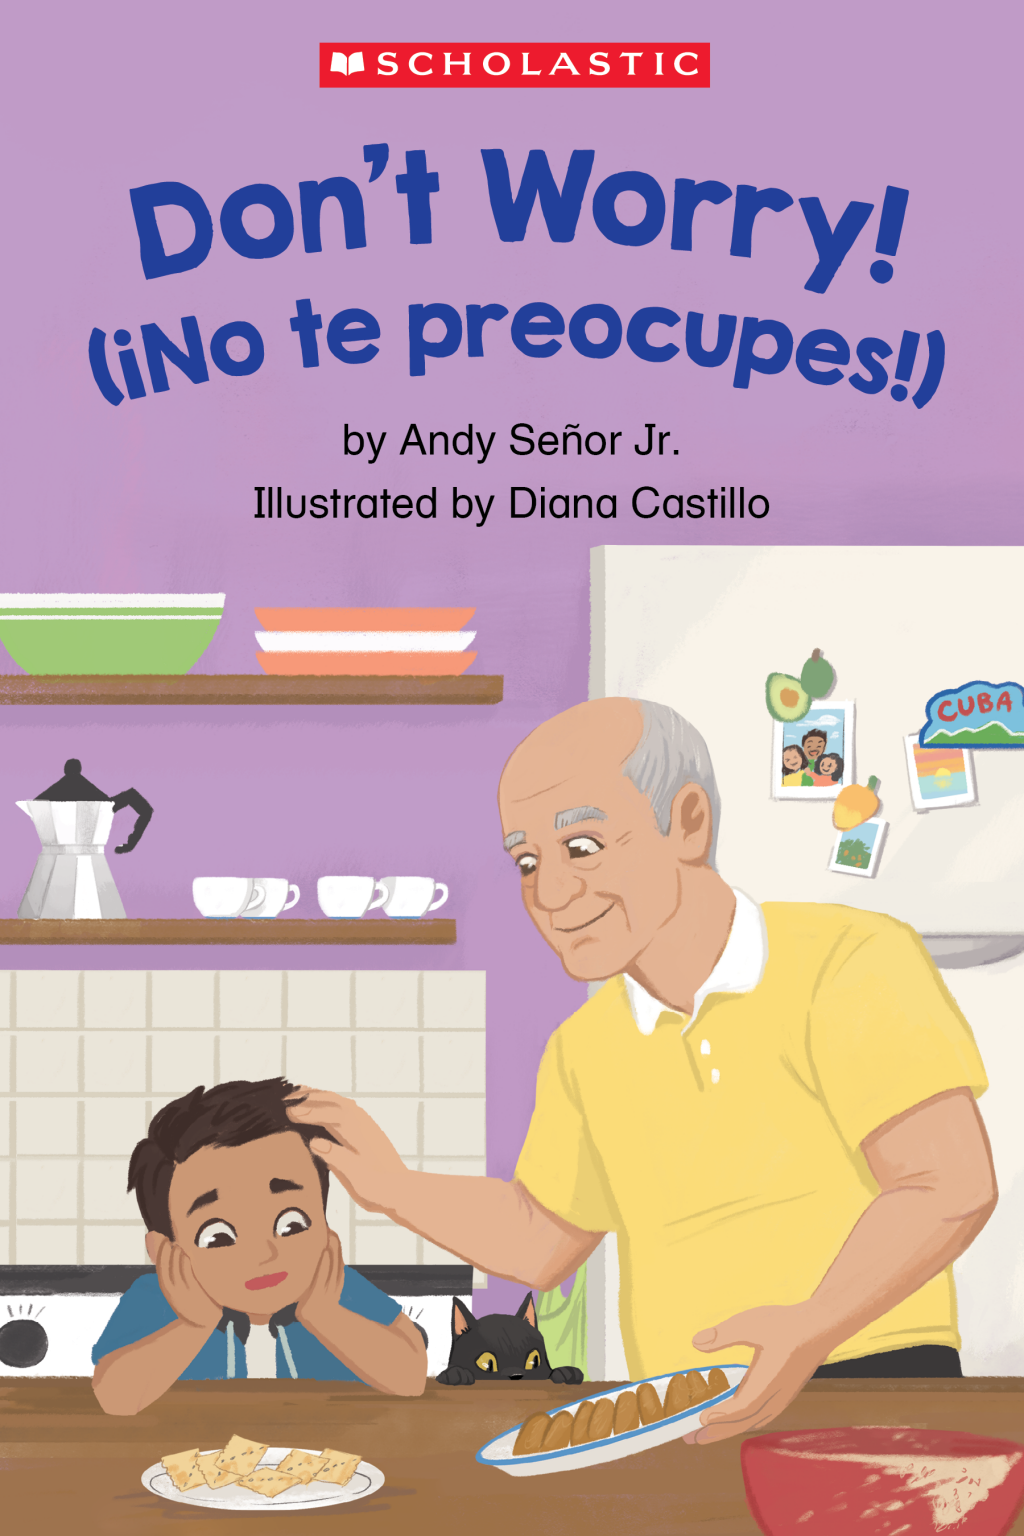 Don't Worry! (iNo te preocupes!) book cover